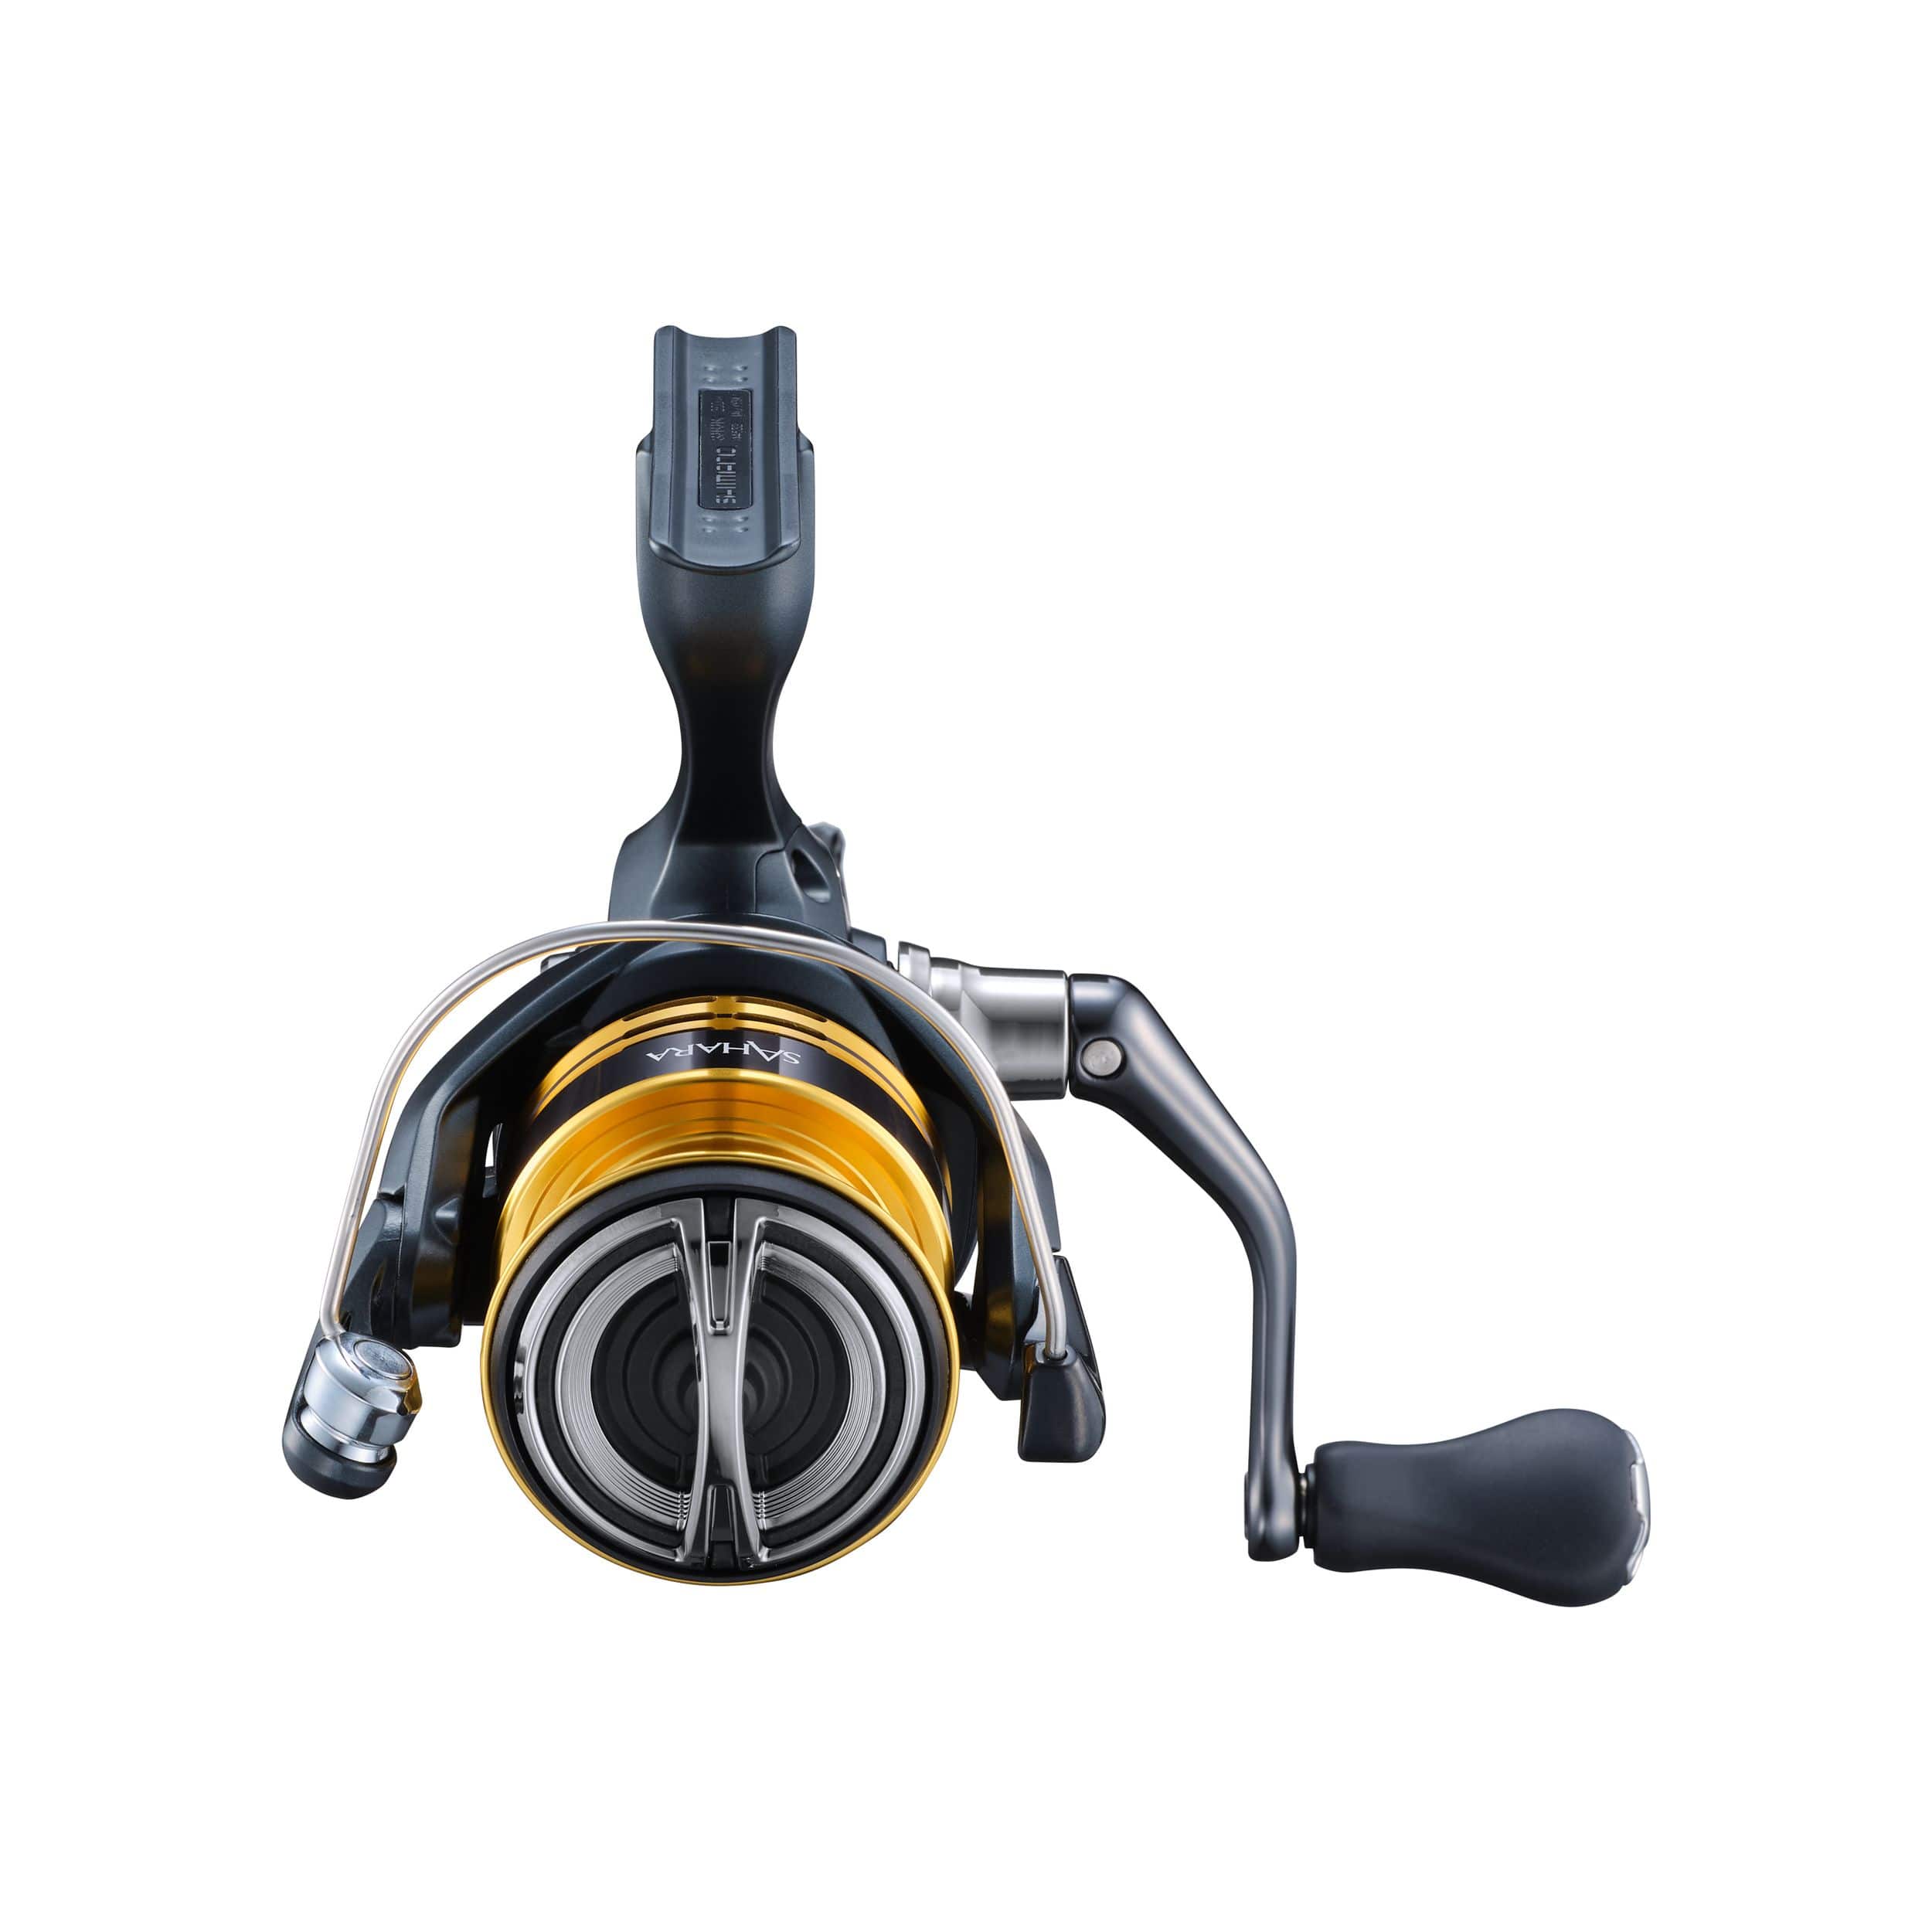 https://media-www.canadiantire.ca/product/playing/fishing/fishing-equipment/0775444/shimano-sahara-spinning-reel-size-2500-0887ce92-89d7-4ed2-b65d-970944bcf66a-jpgrendition.jpg